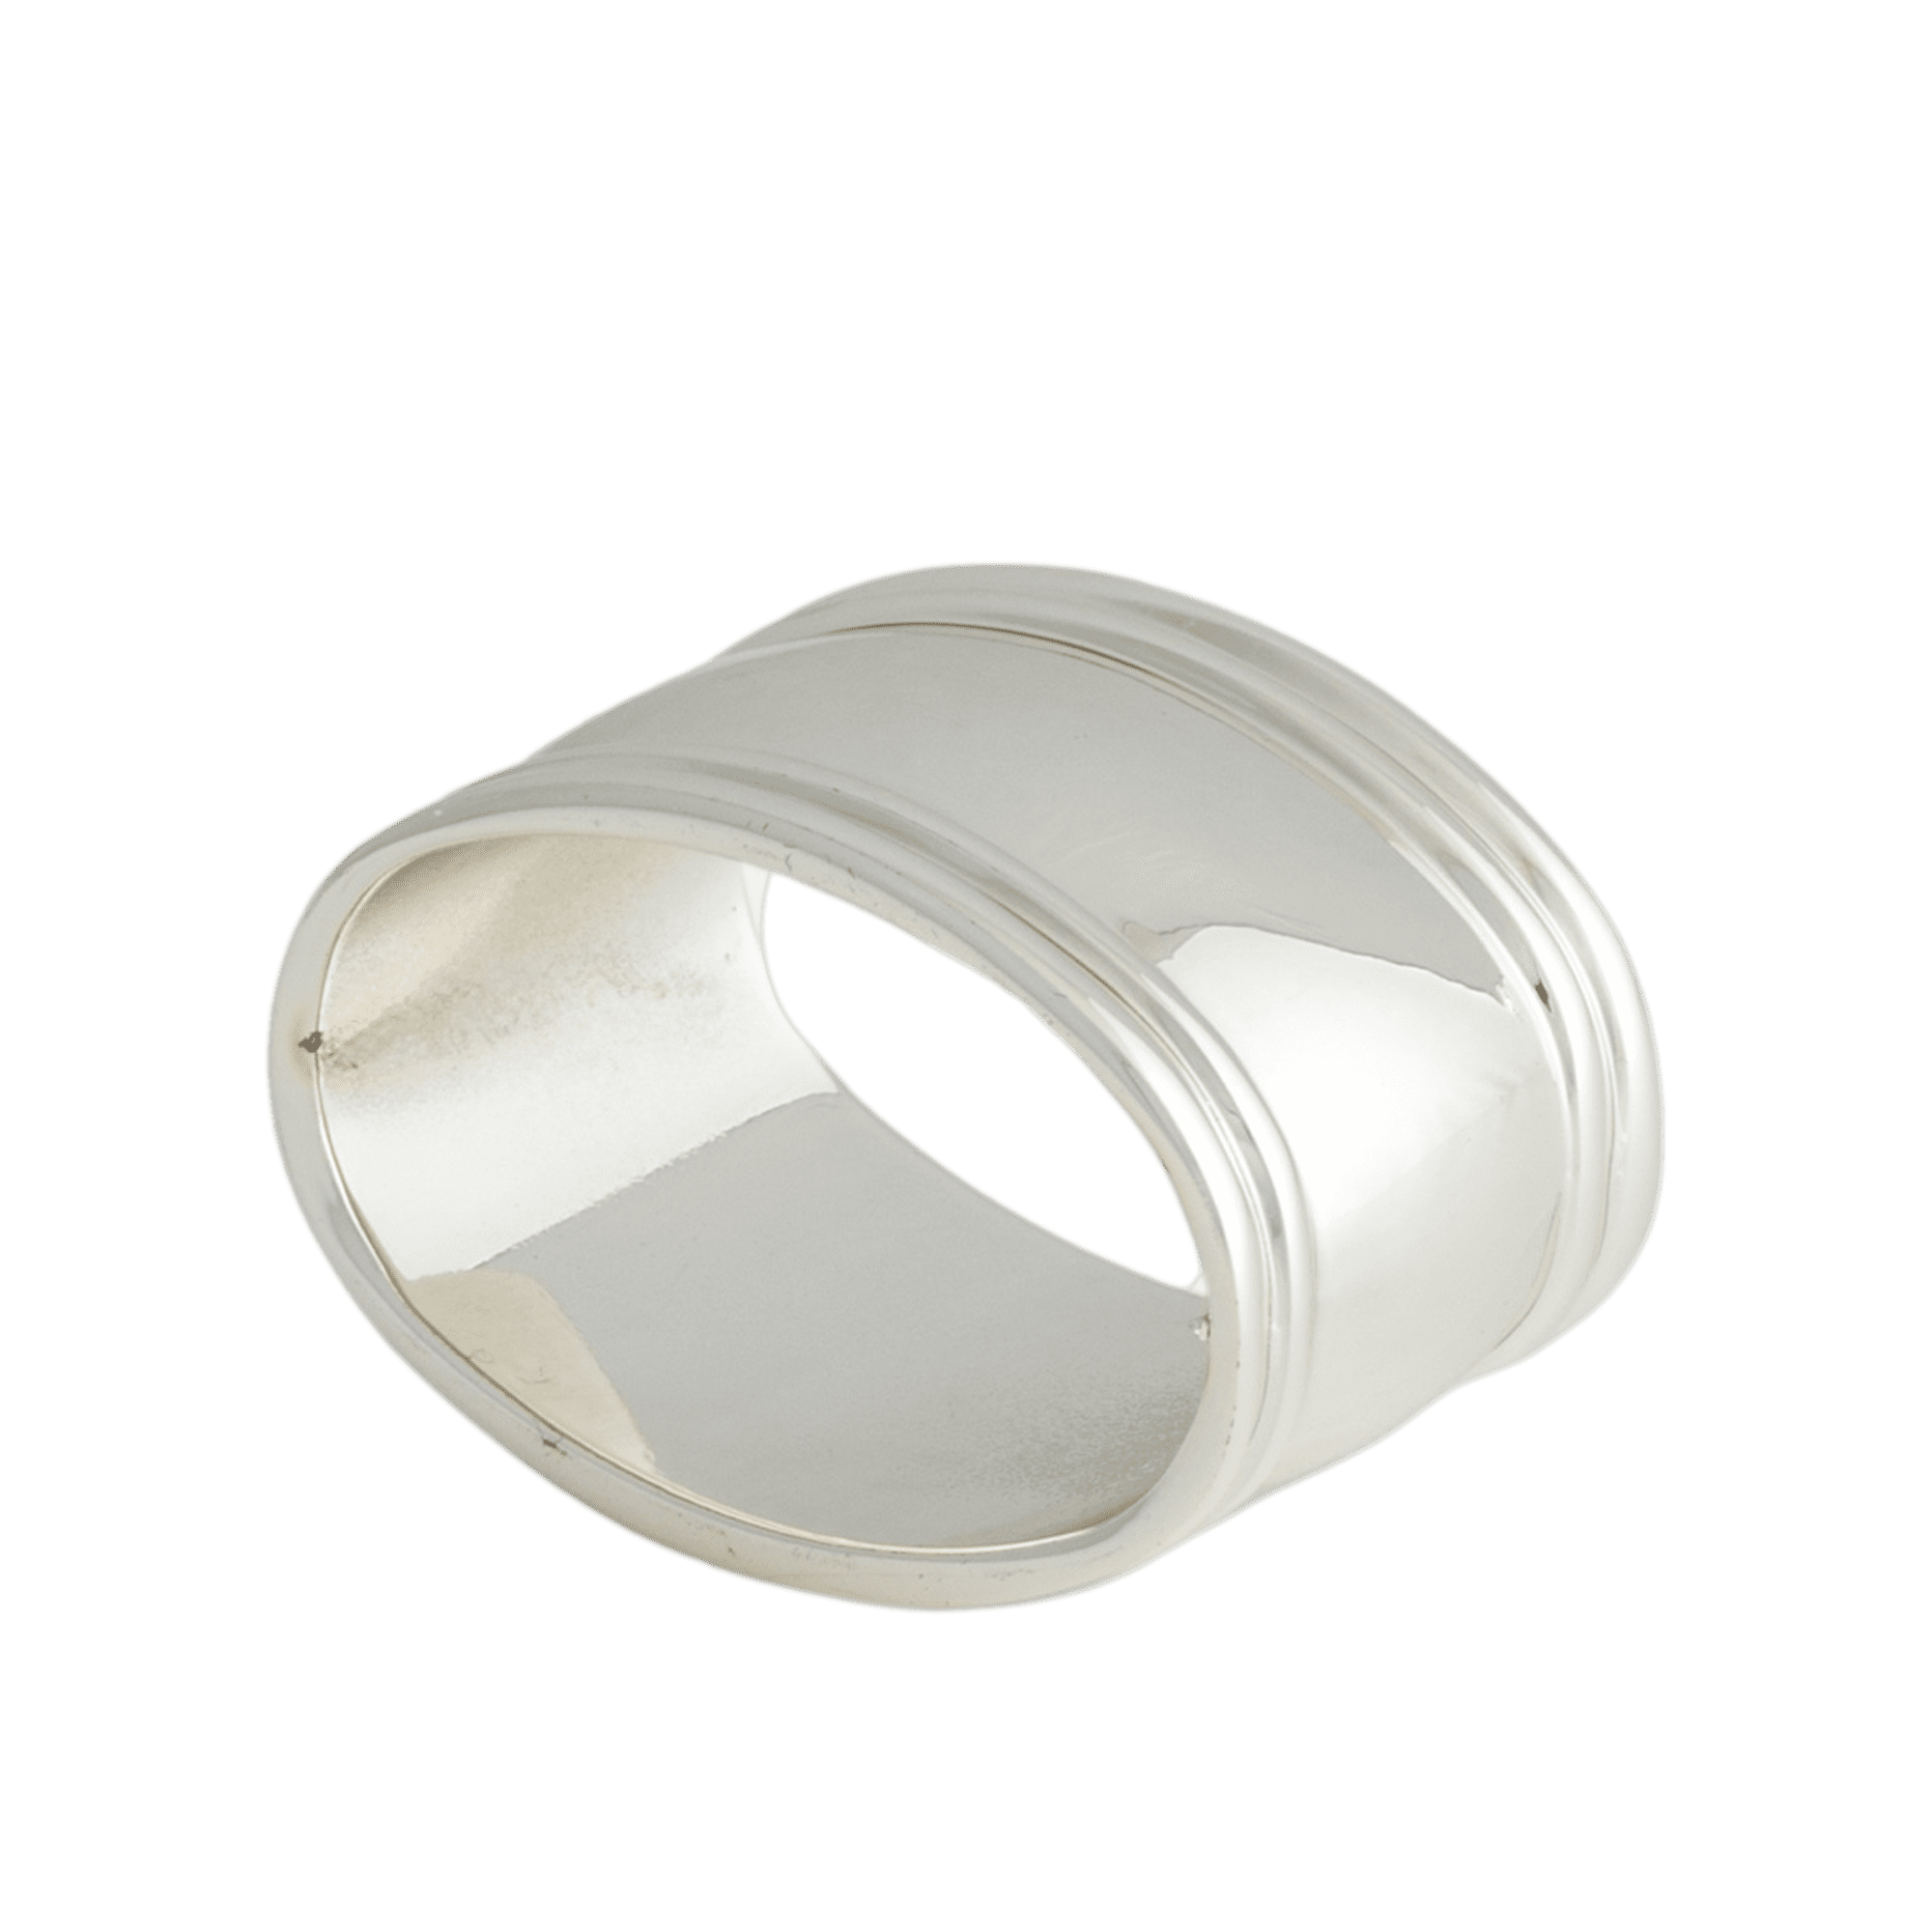 Classic Oval Napkin Rings Set Of 4